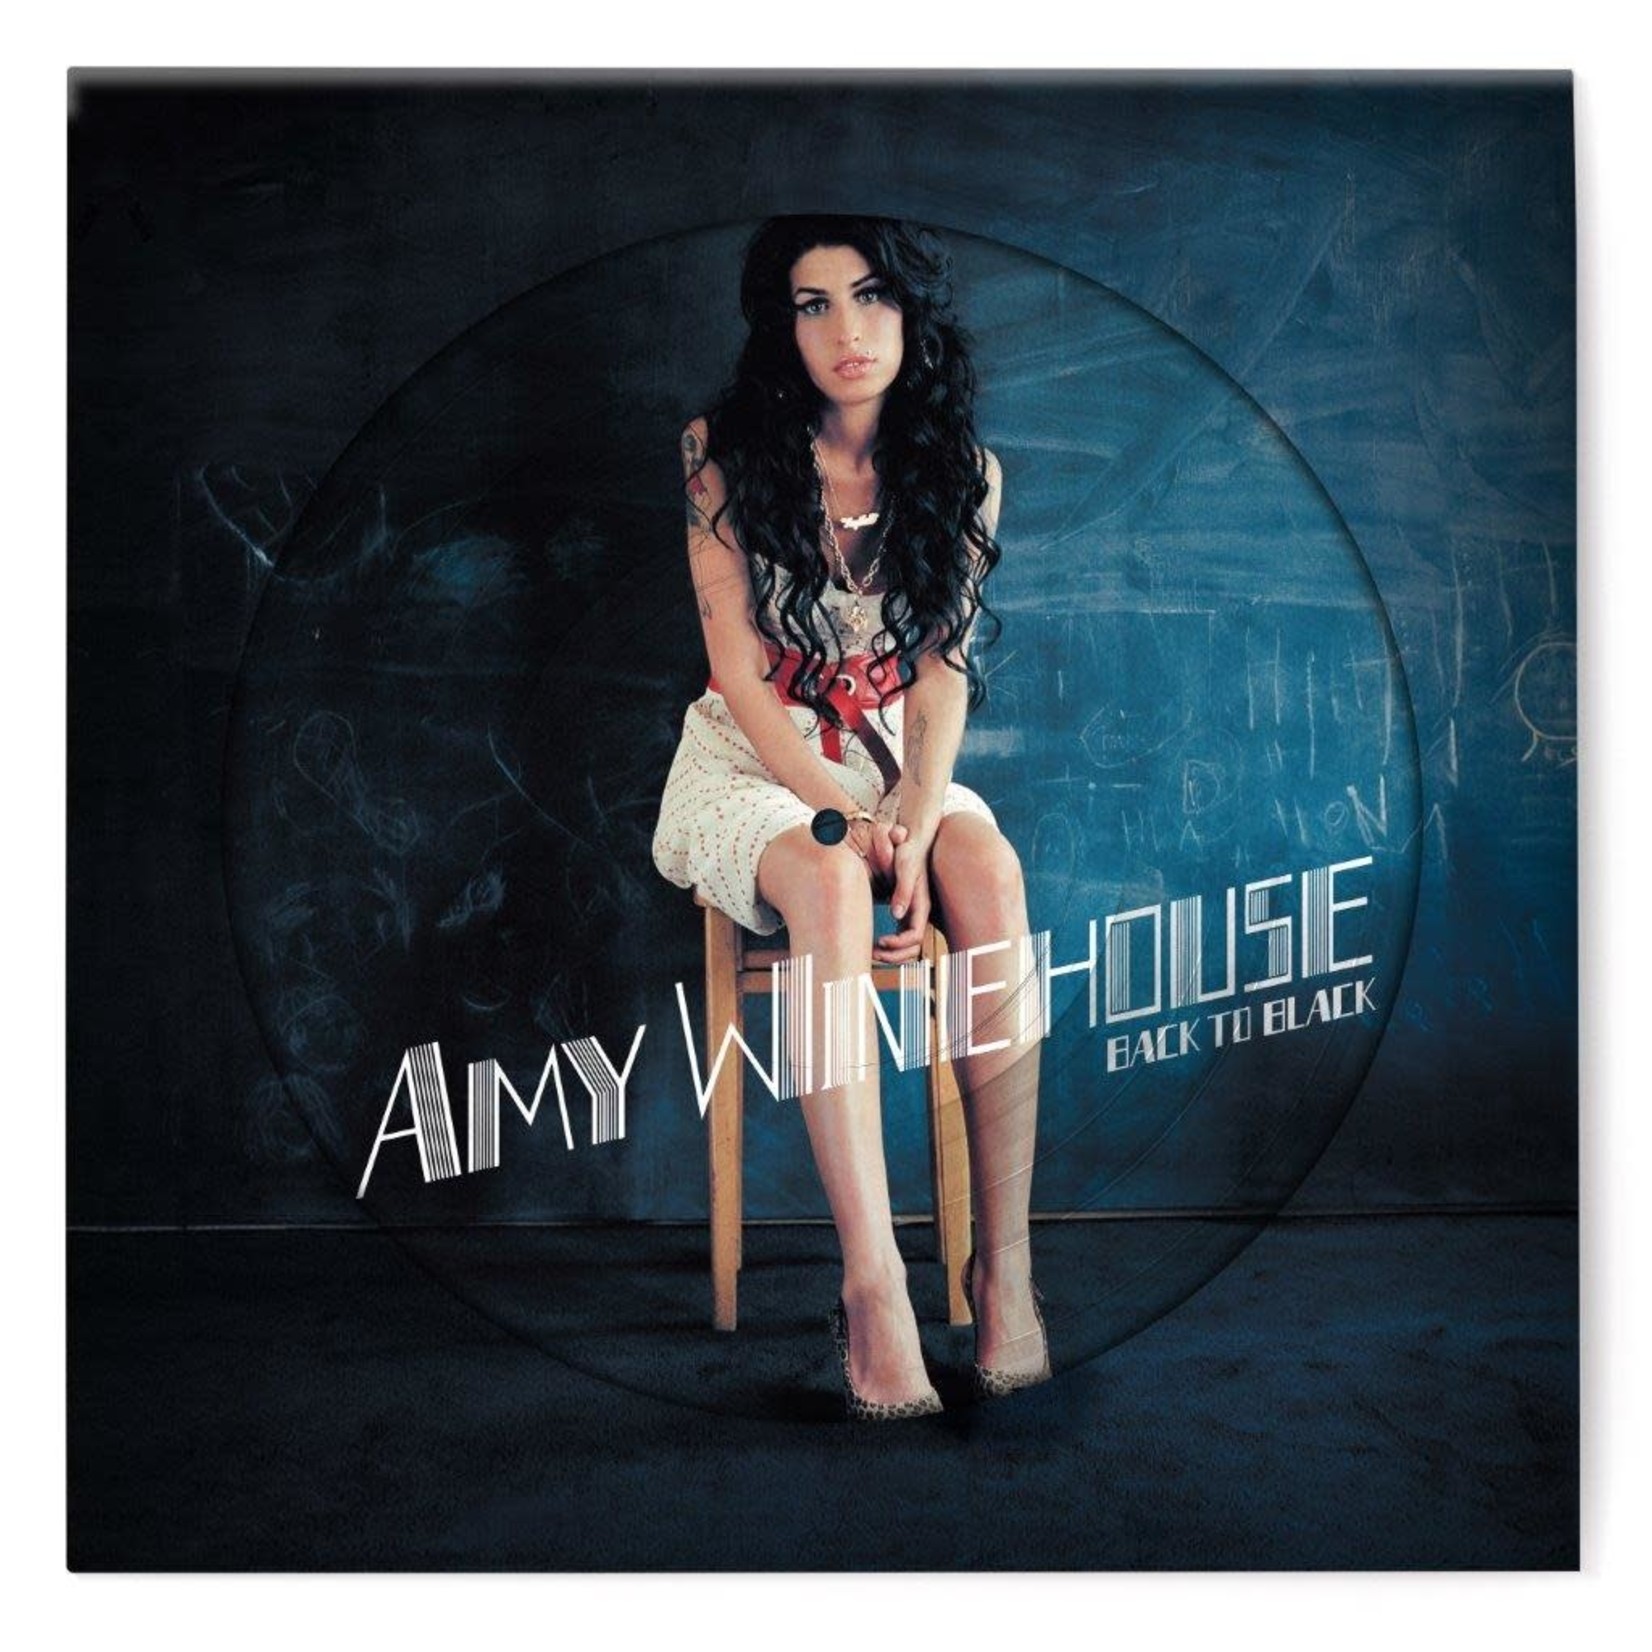 [New] Winehouse, Amy: Back To Black (limited edition, 15th anniversary picture disc) [USM]